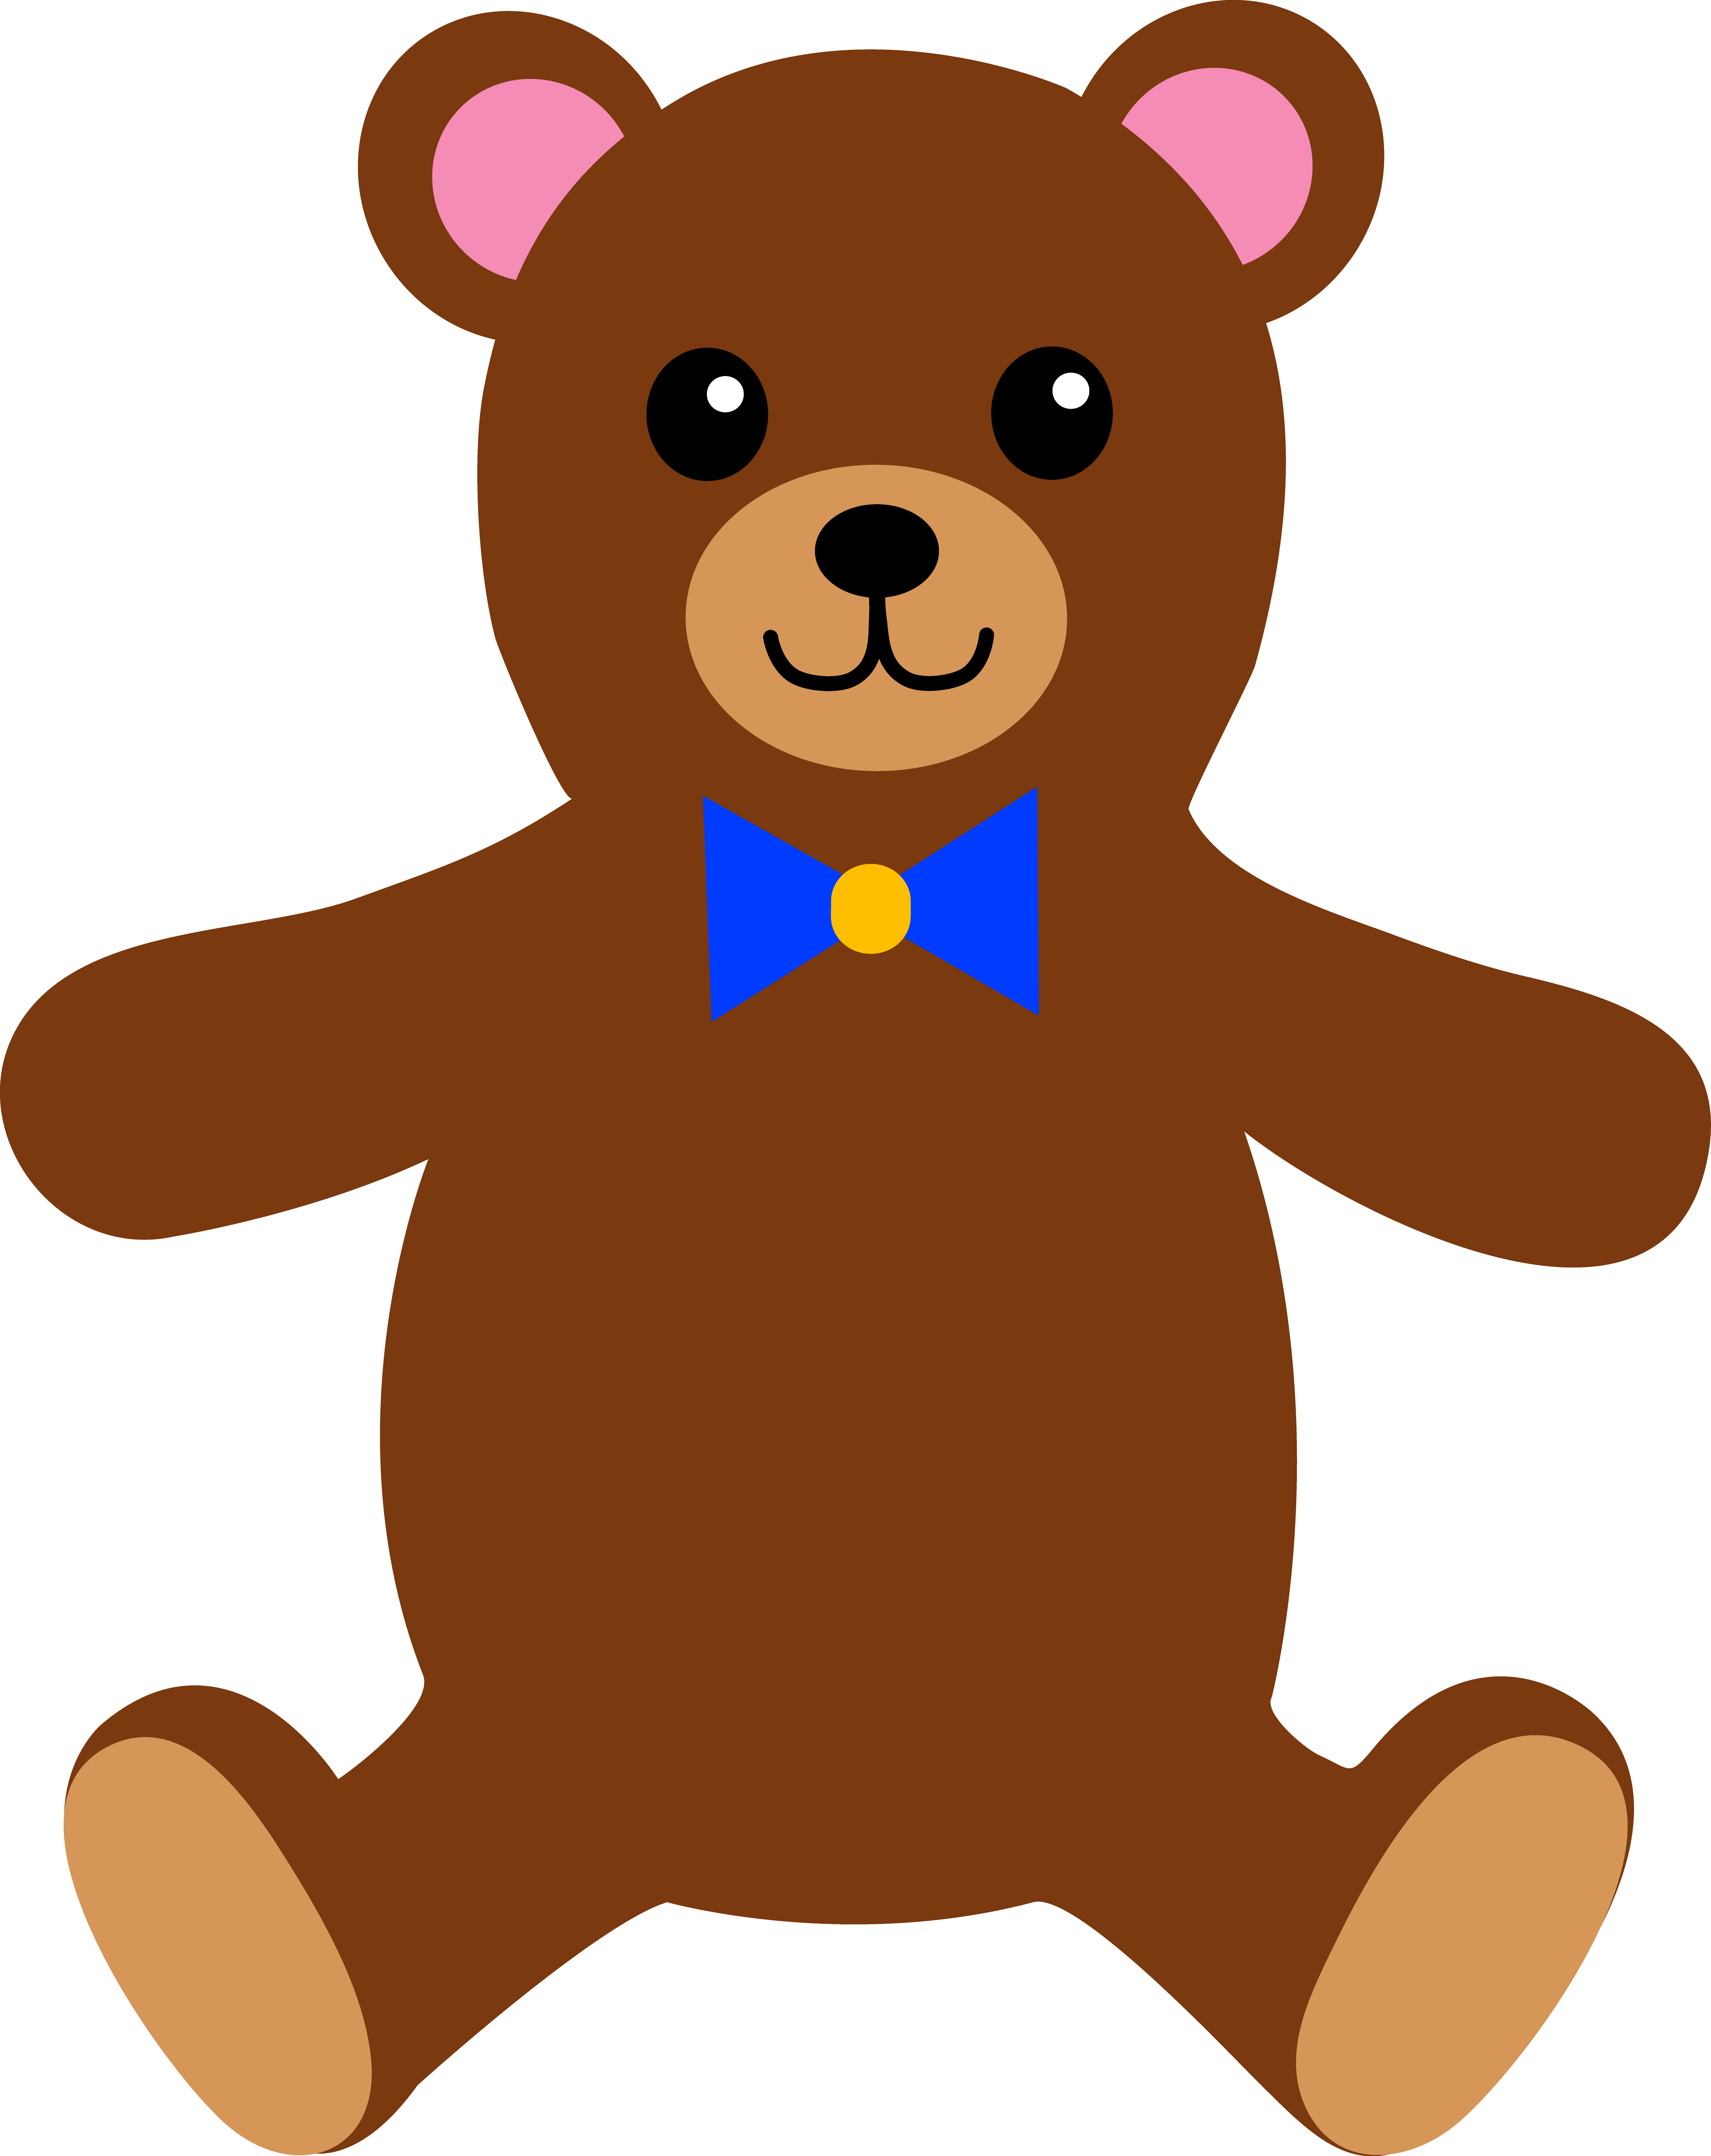 Bears Images Free - Cliparts.co